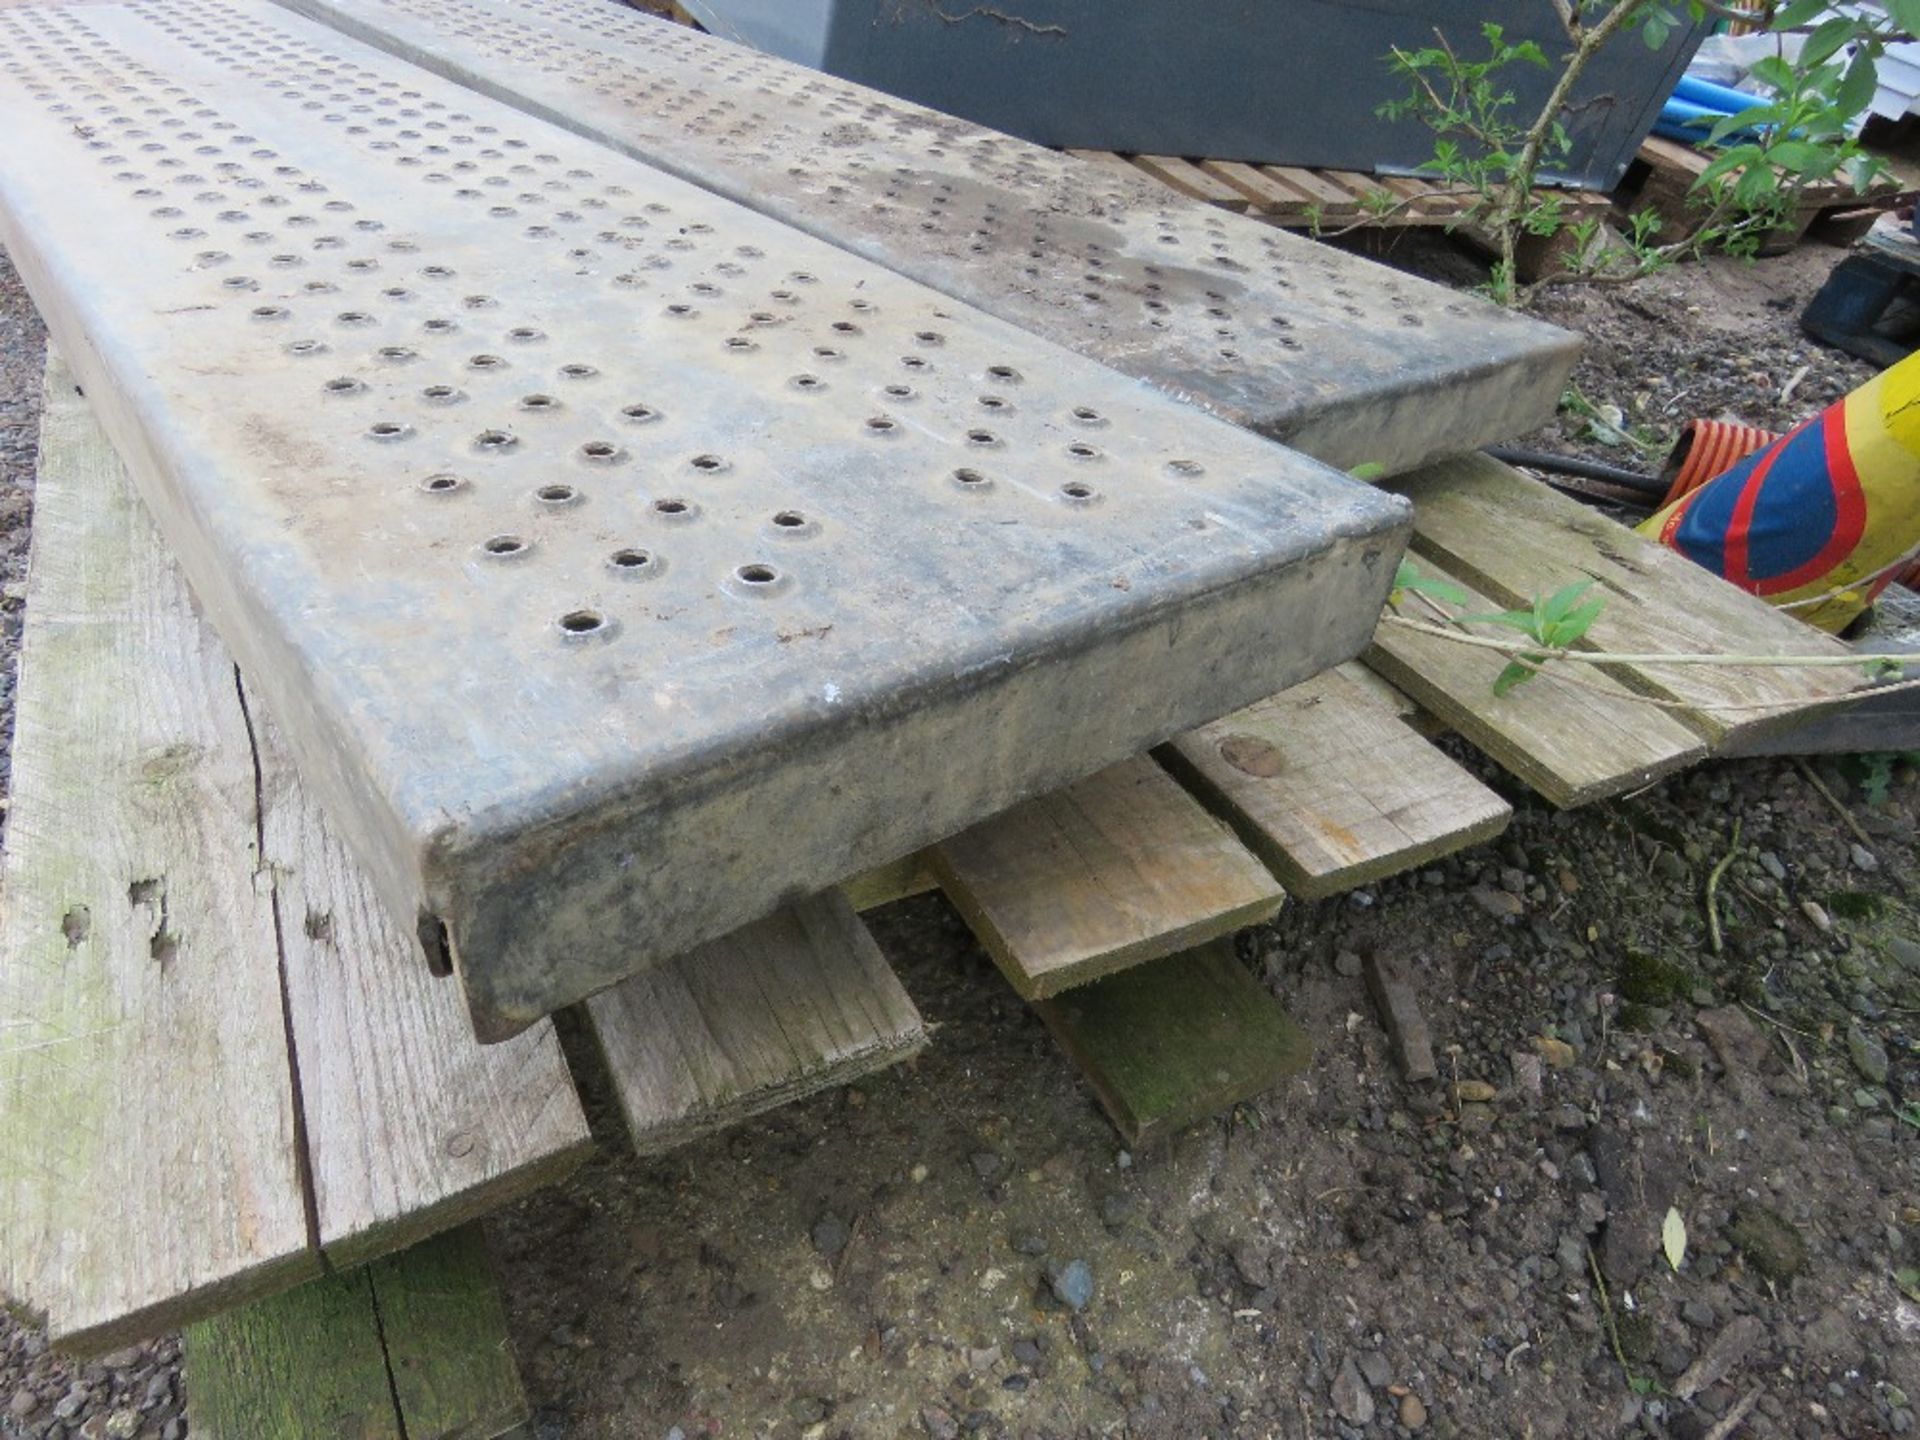 PAIR OF STEEL LOADING RAMPS 8FT LENGTH APPROX. - Image 5 of 7